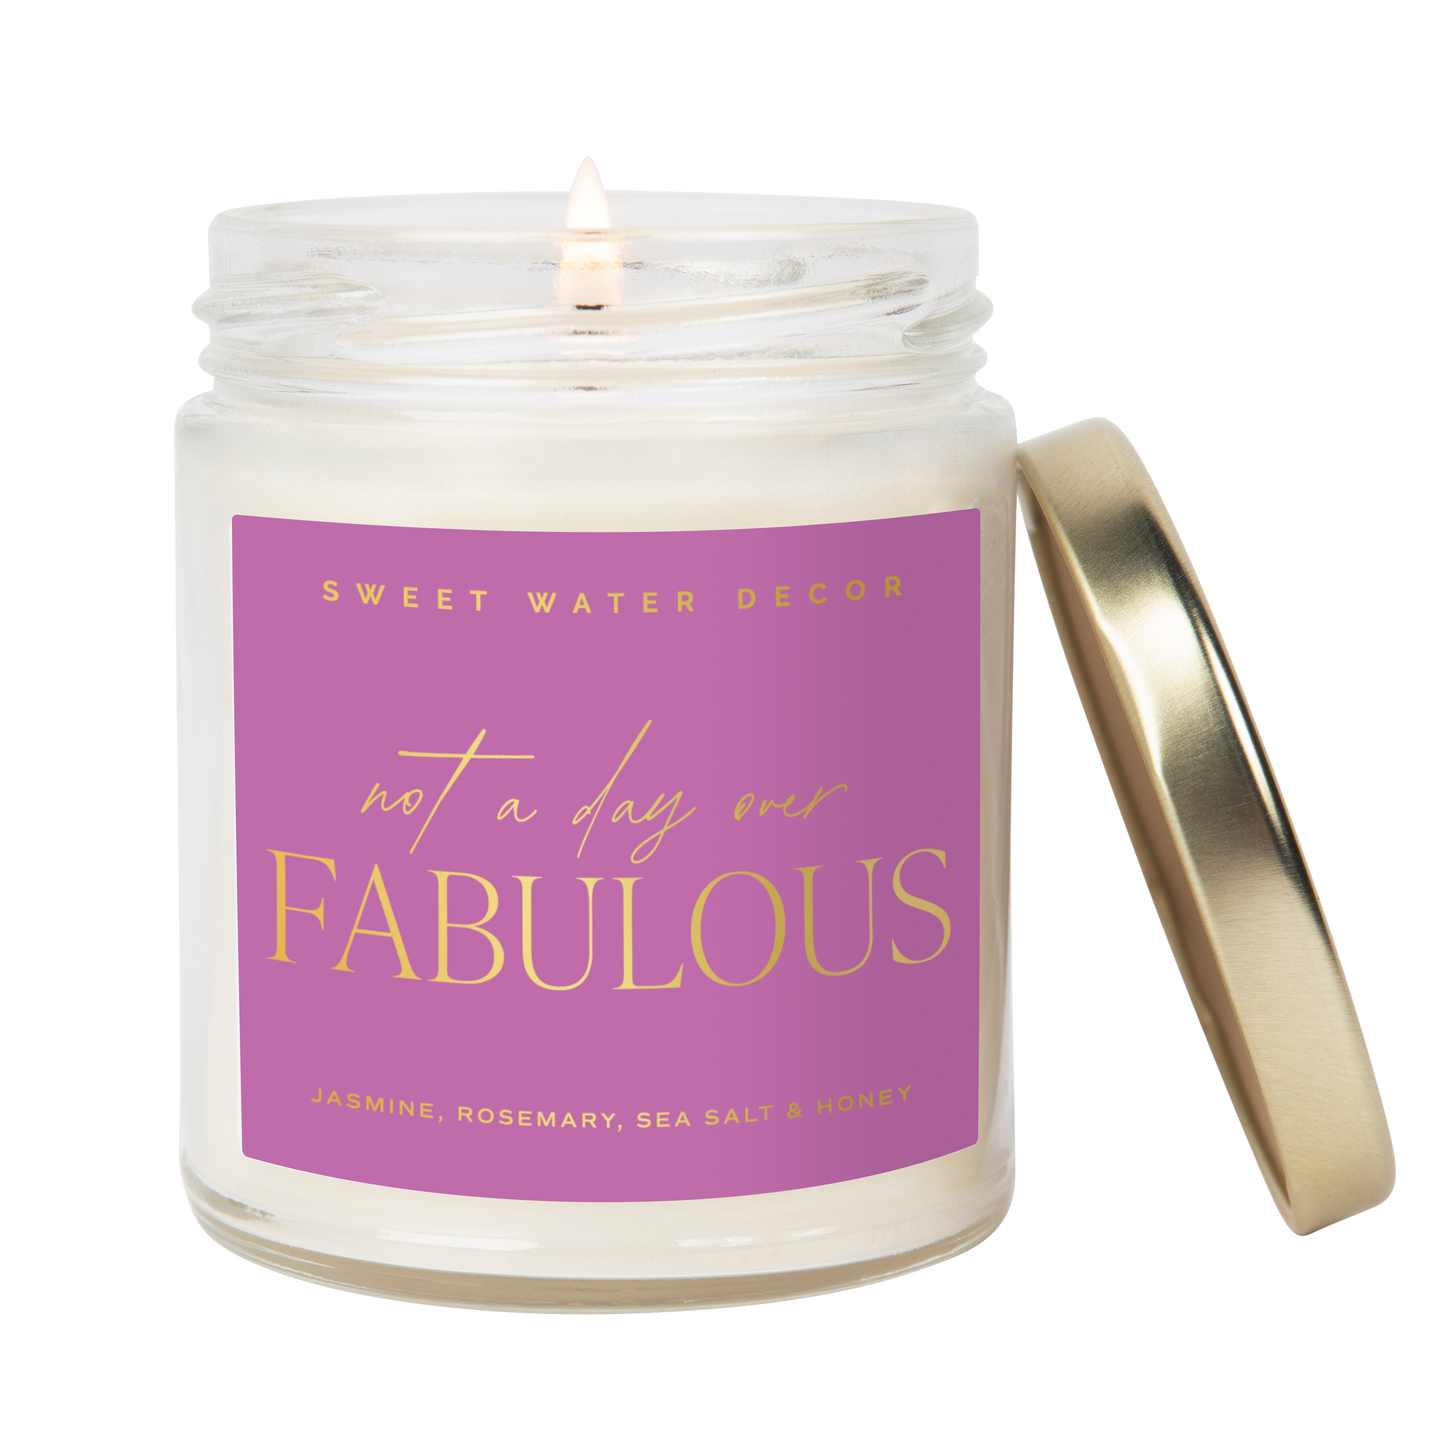 Not A Day Over Fabulous Soy Candle, 9 oz